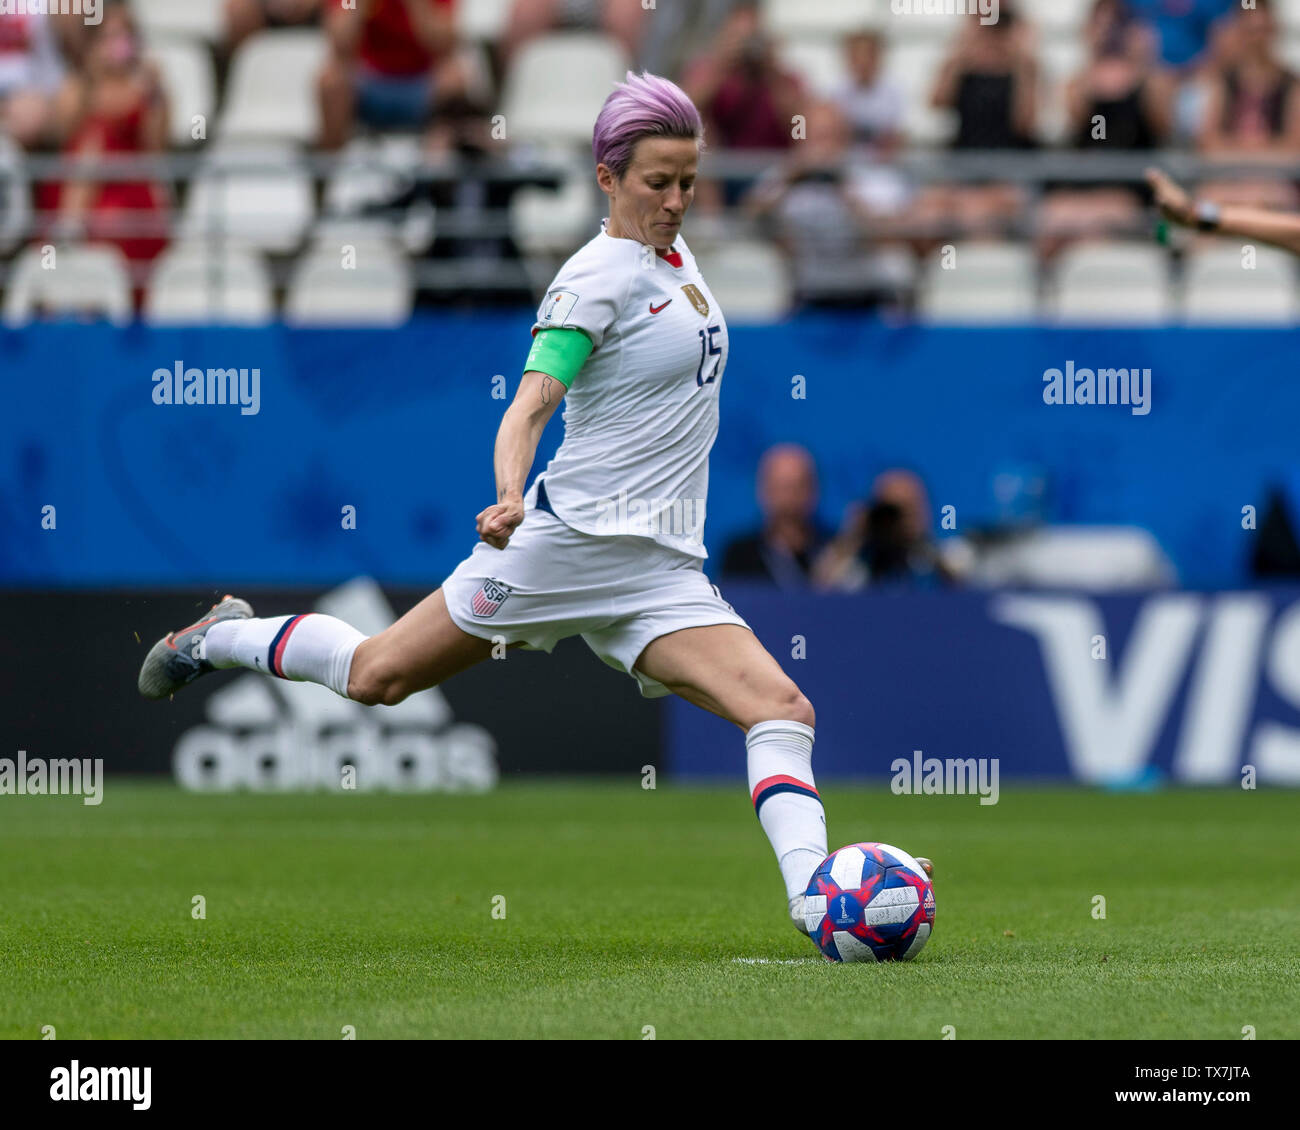 REIMS, MA - 24.06.2019: USA X SPAIN - Megan Rapinoe of the United States score goal (1-0) during a match between the United States and Spain. The Match for the octaves of the 2019 Women&#3World Cup.Cup. FIFA. Held at the Auguste Delaune Stadium in Reims, France. (Photo: Richard Callis/Fotoarena) Stock Photo